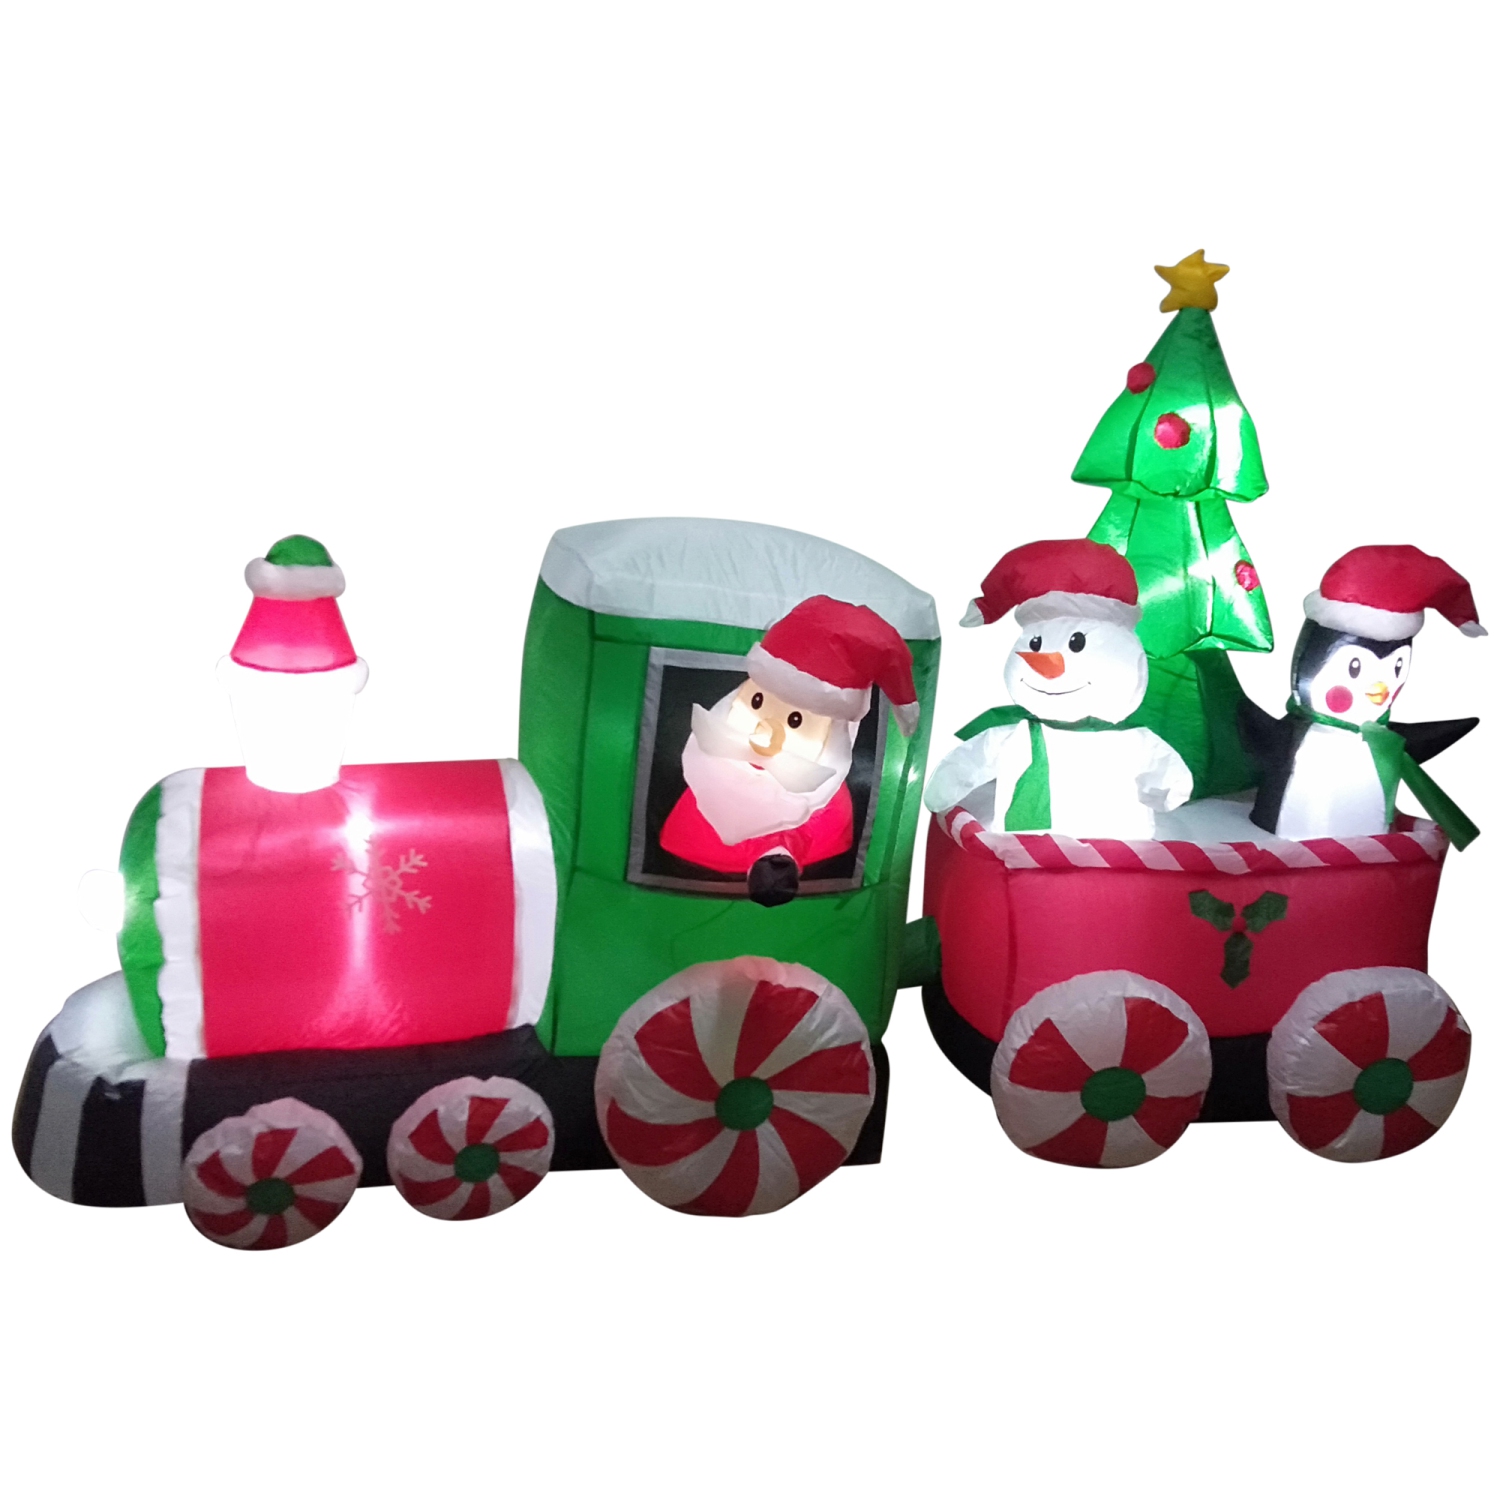 8' Inflatable Train With Santa and Friends Outdoor Christmas Decoration